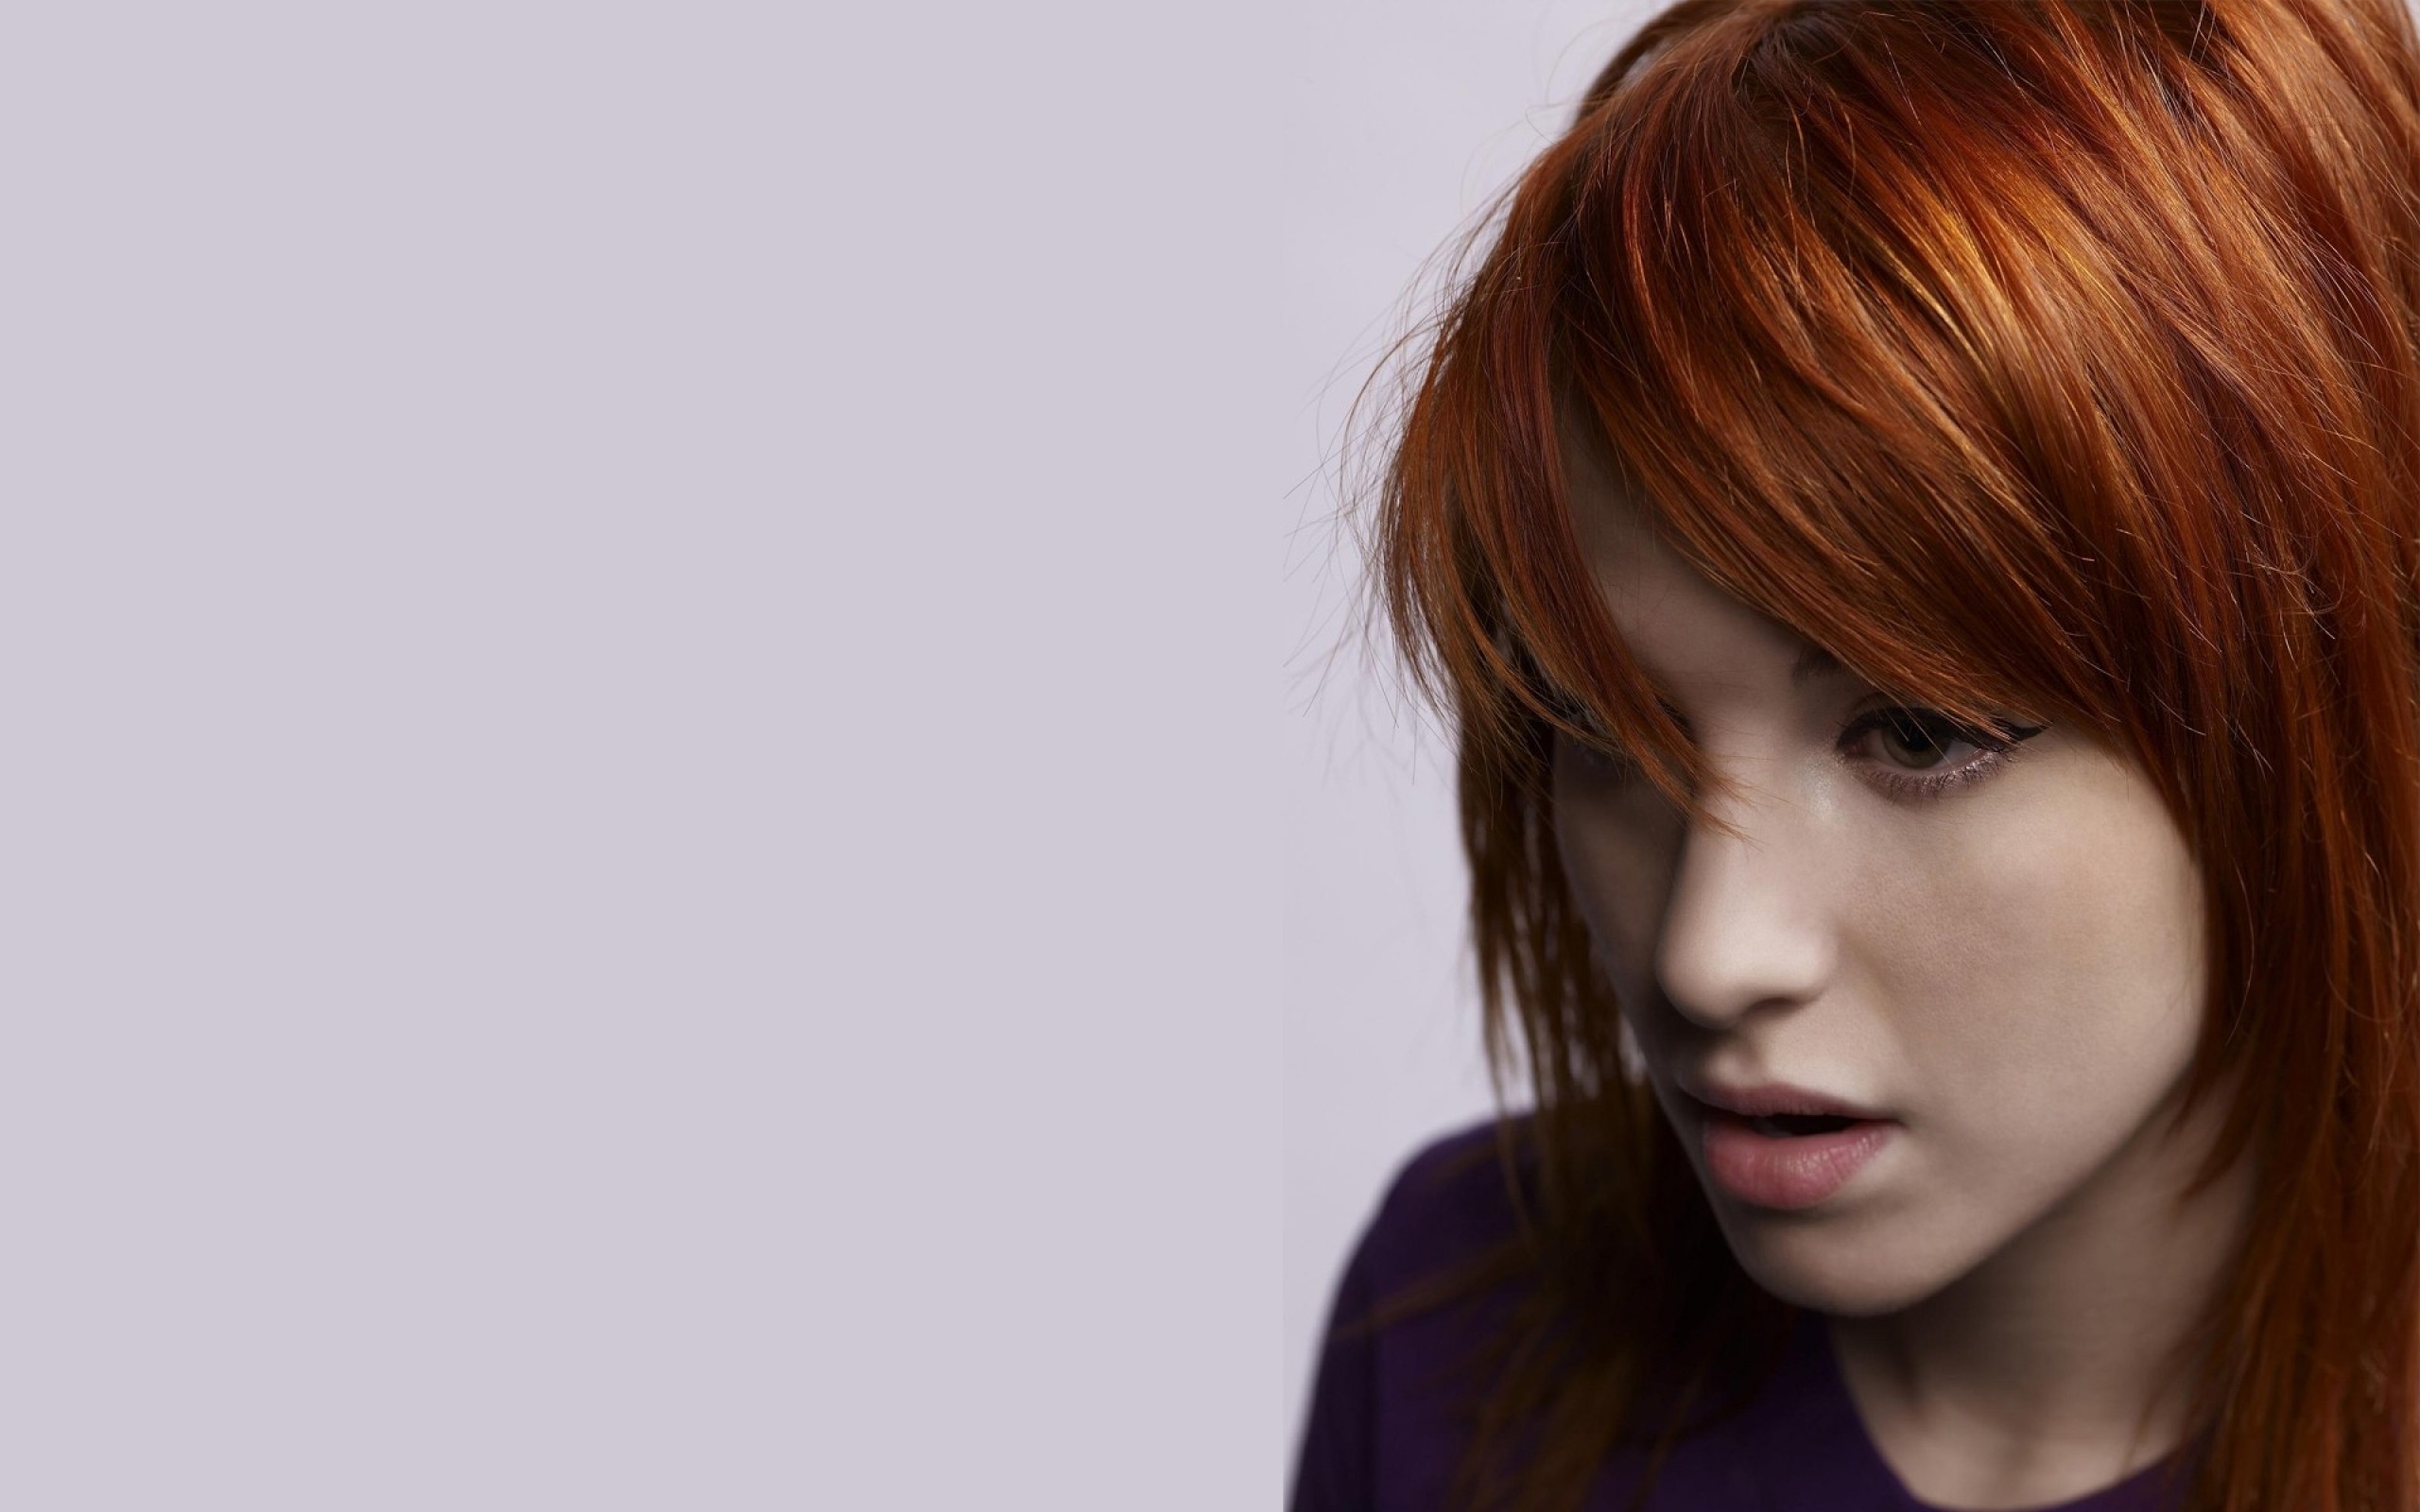 Simple Background Paramore Hayley Williams Redhead Women Band Singer 2560x1600